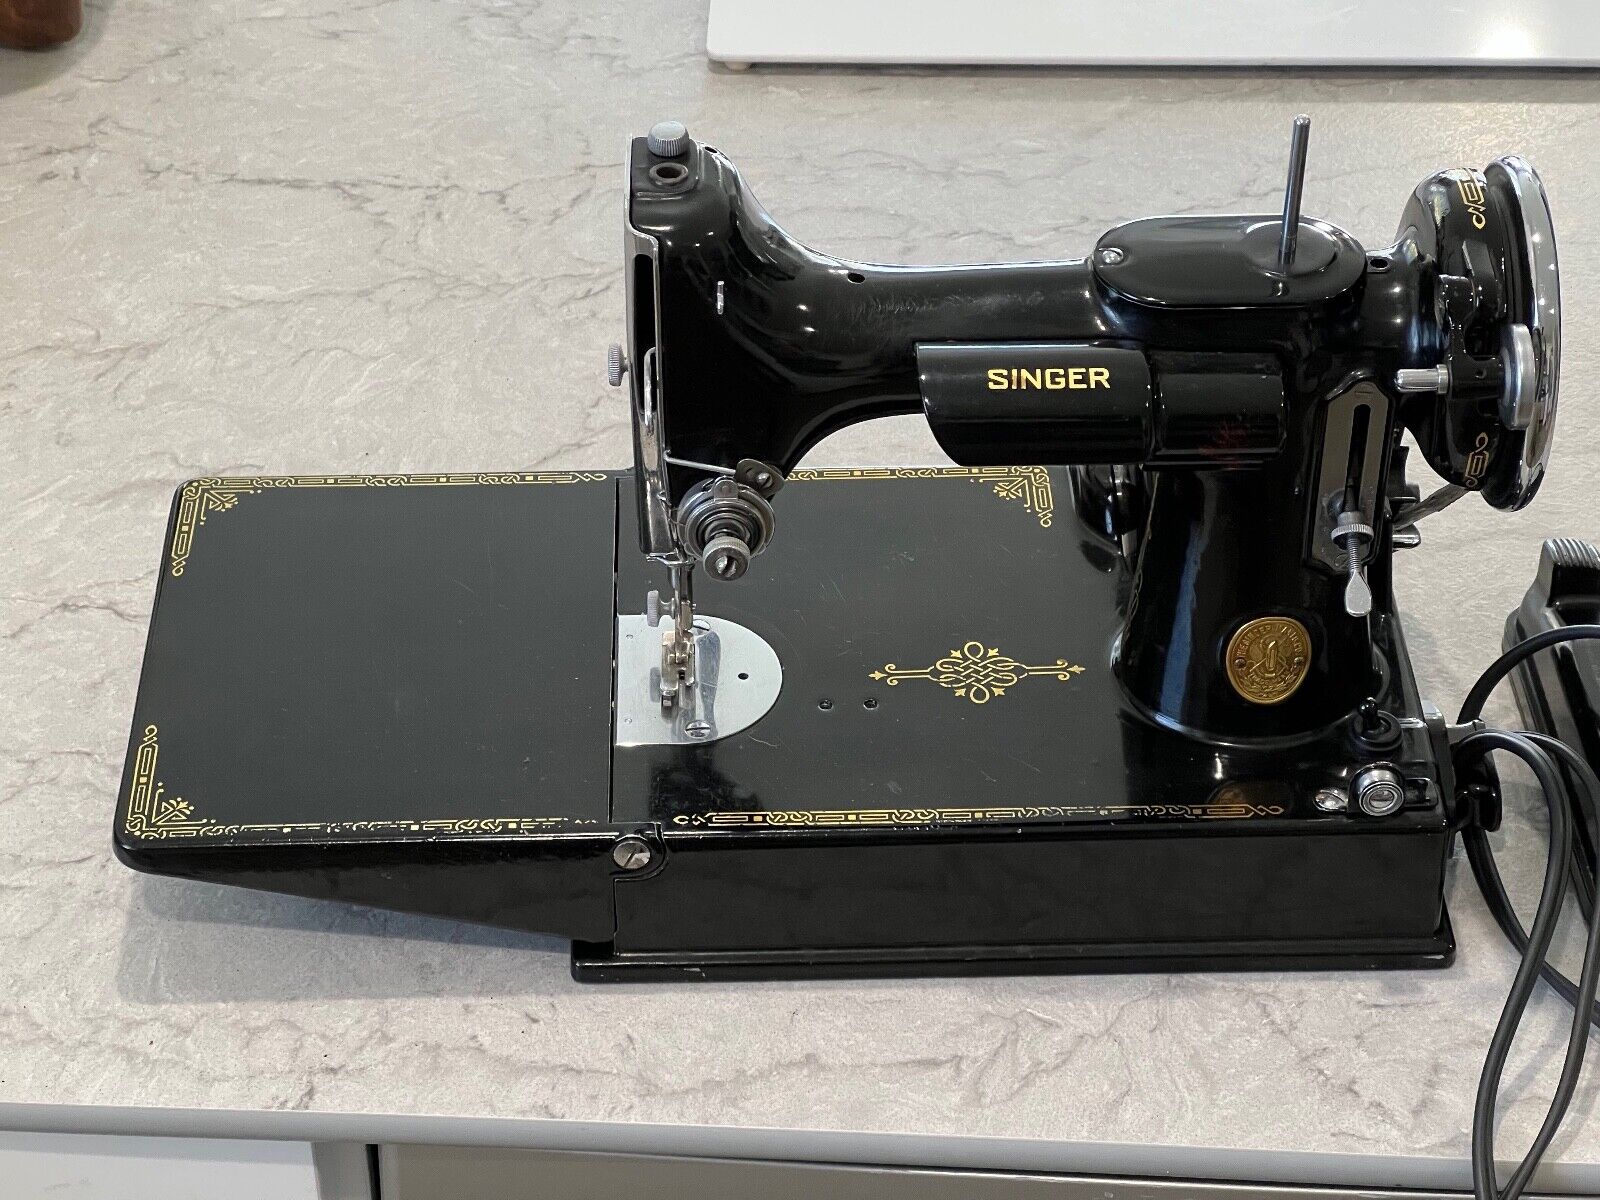 Singer 221 Featherweight Sewing Machine with Accessories & Case 1937 WATCH VIDEO